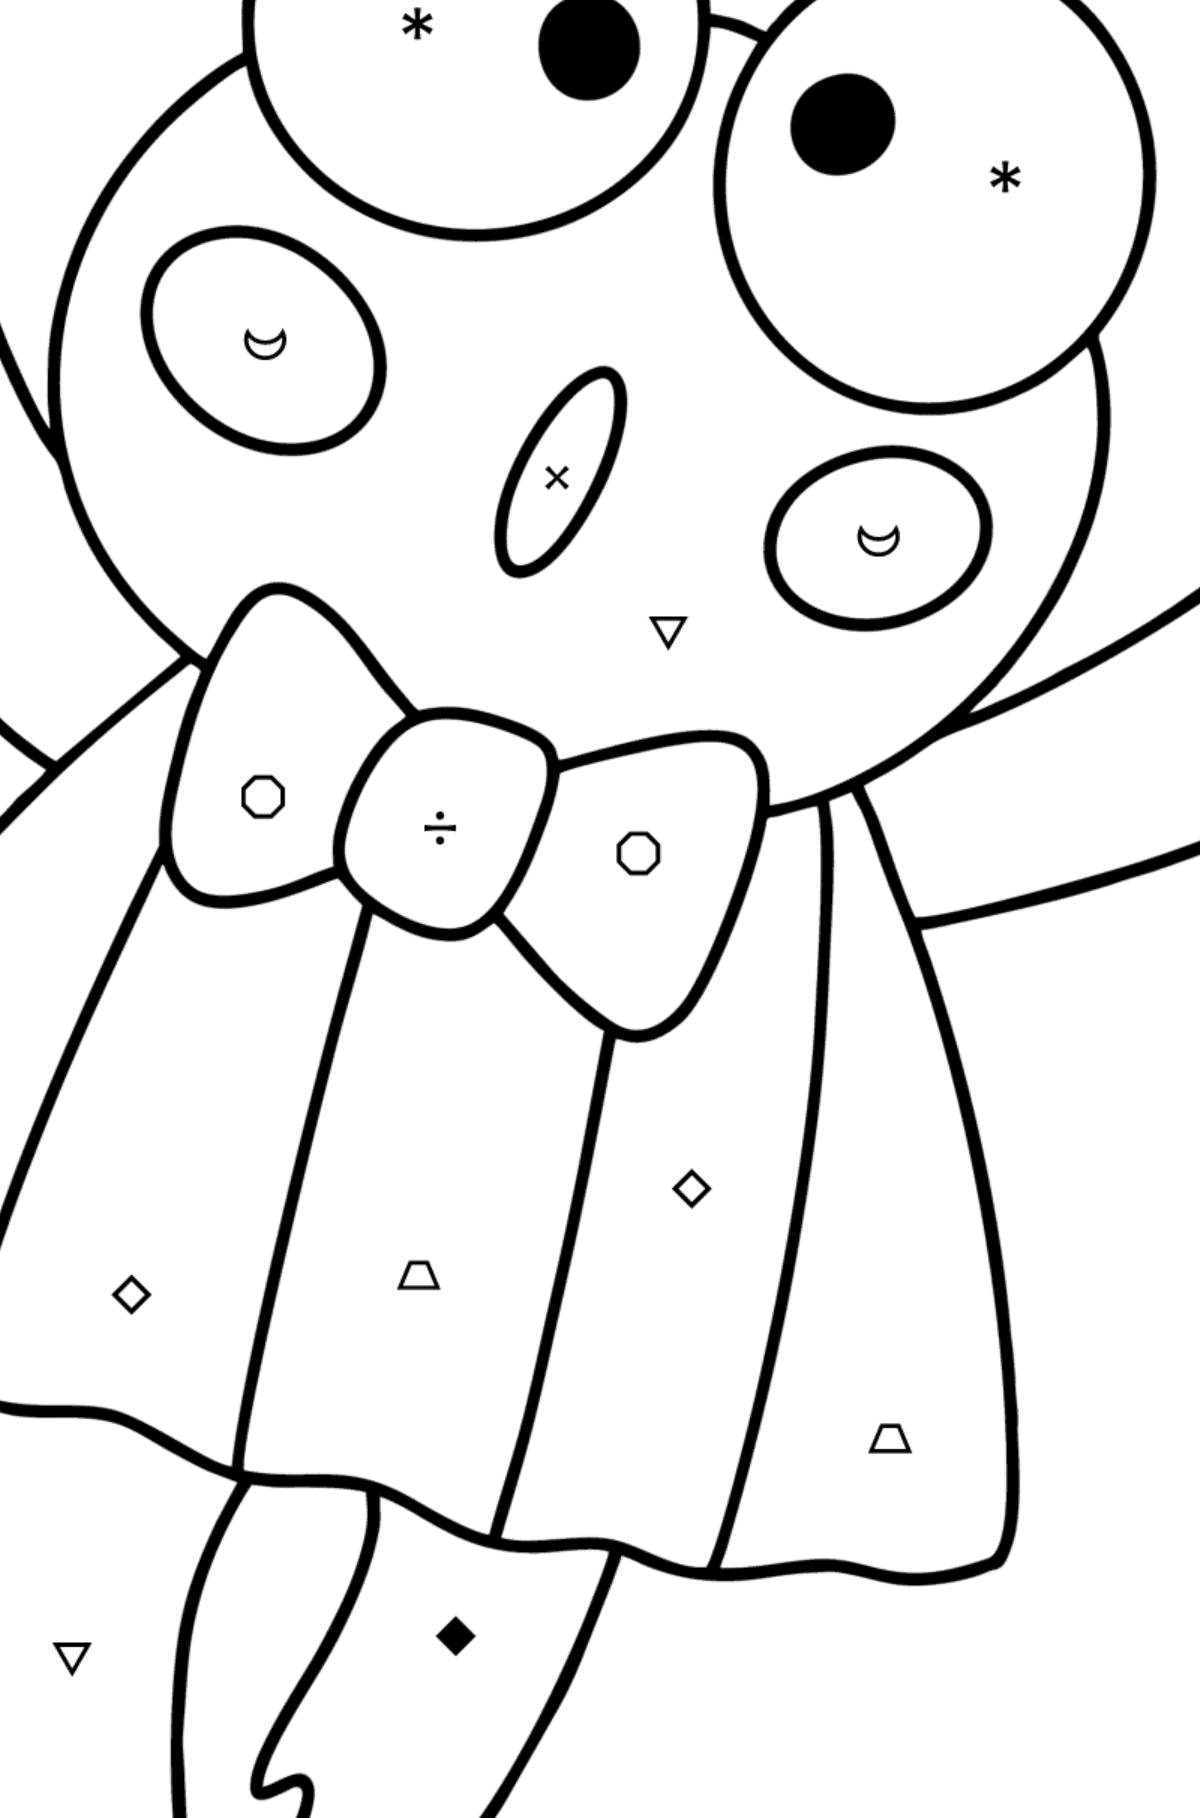 Hello Kitty Keroppi coloring page - Coloring by Symbols and Geometric Shapes for Kids